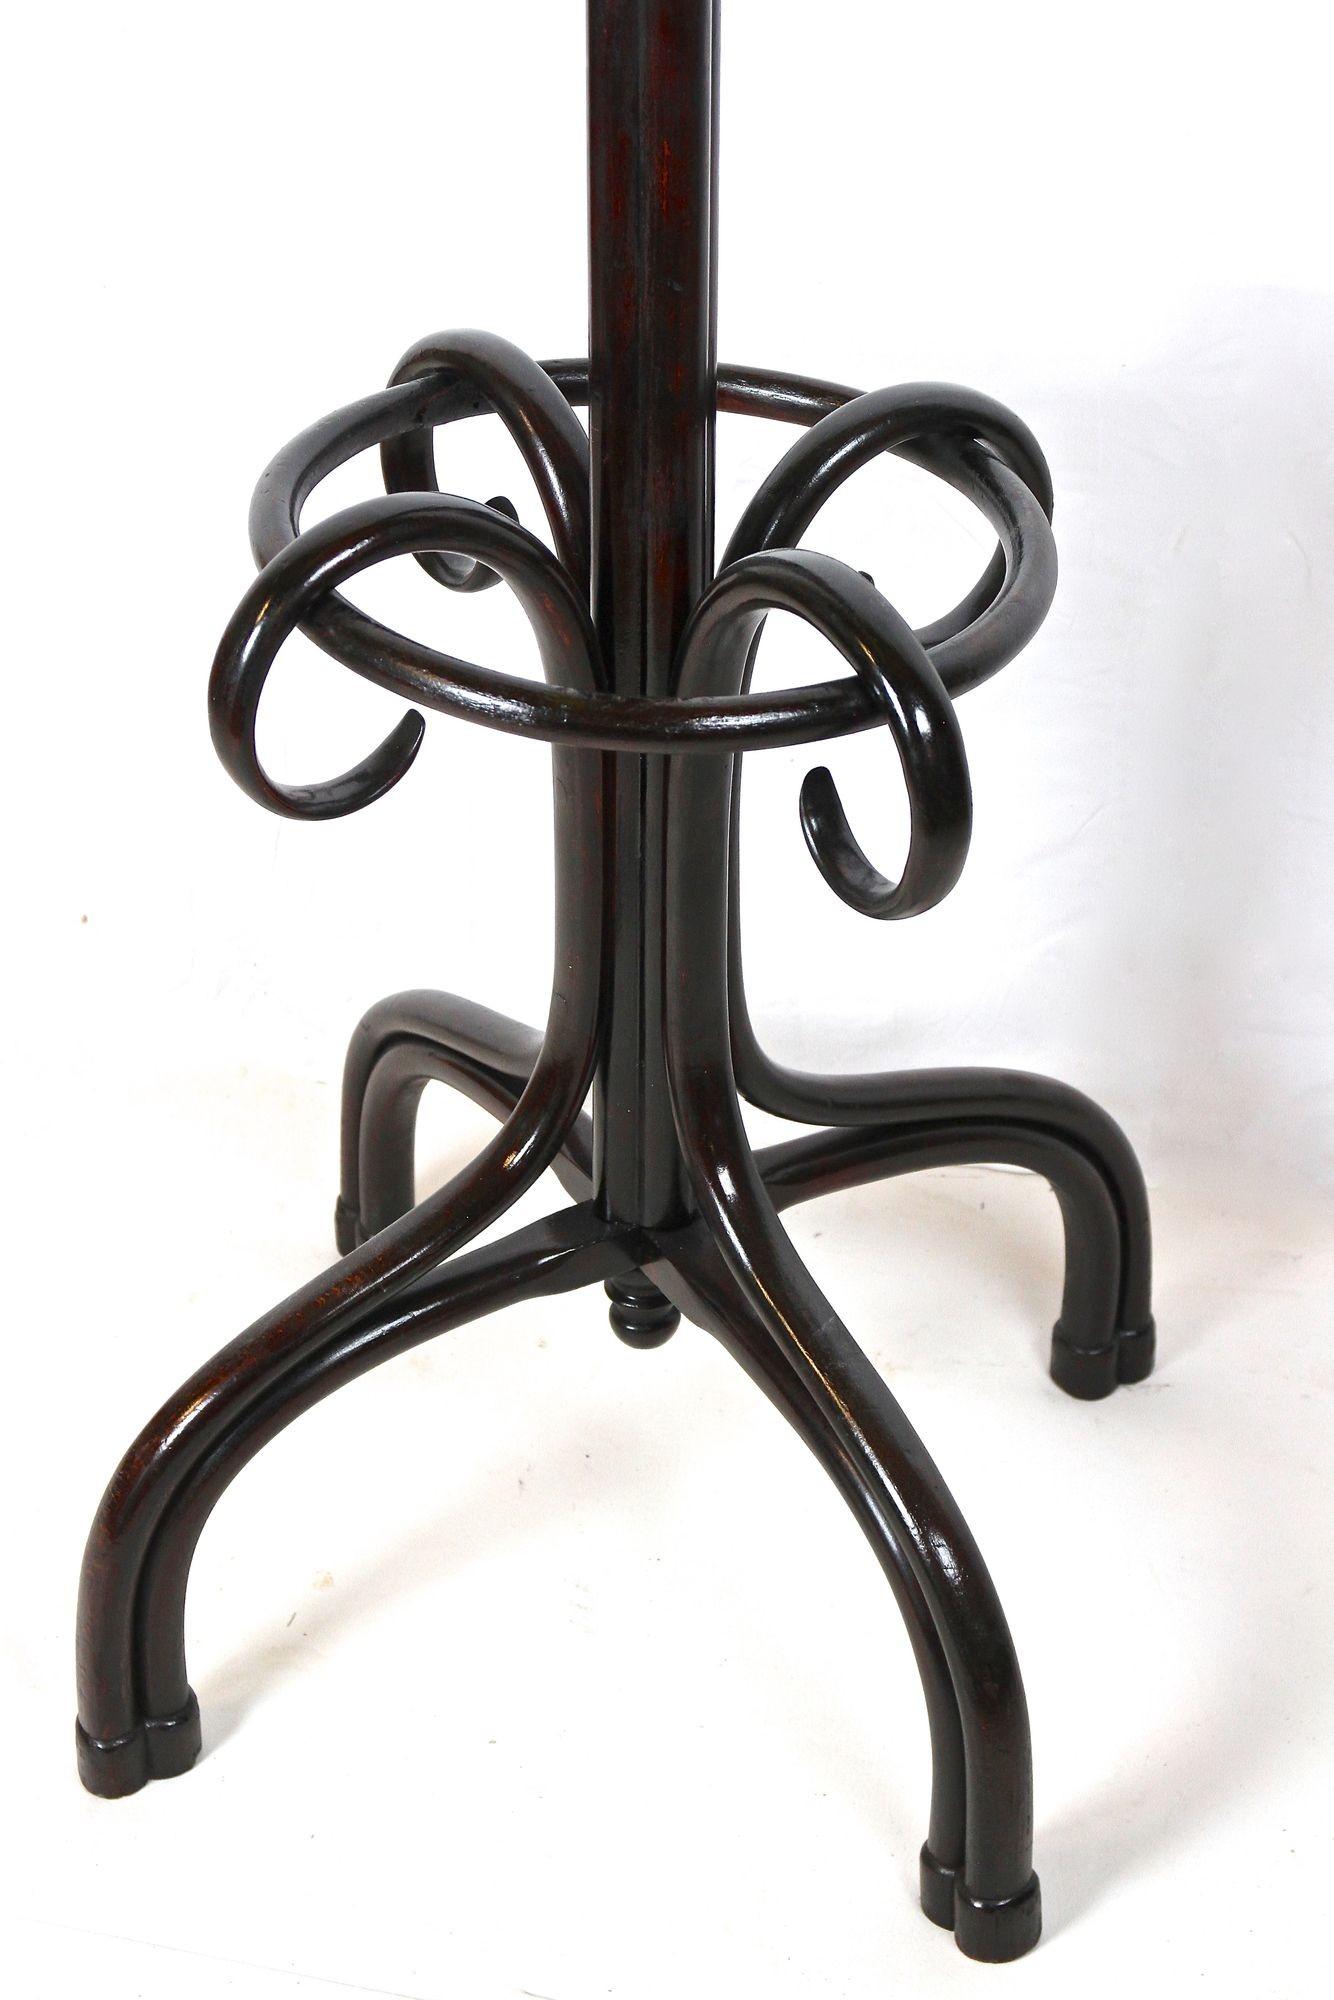 Beautiful, large bentwood coat rack or wardrobe stand from the world renowed company of Thonet. Elaborately made in the early 20th century around 1905 it shows a spectacular design. Coming in perfect restored original condition, this freestanding